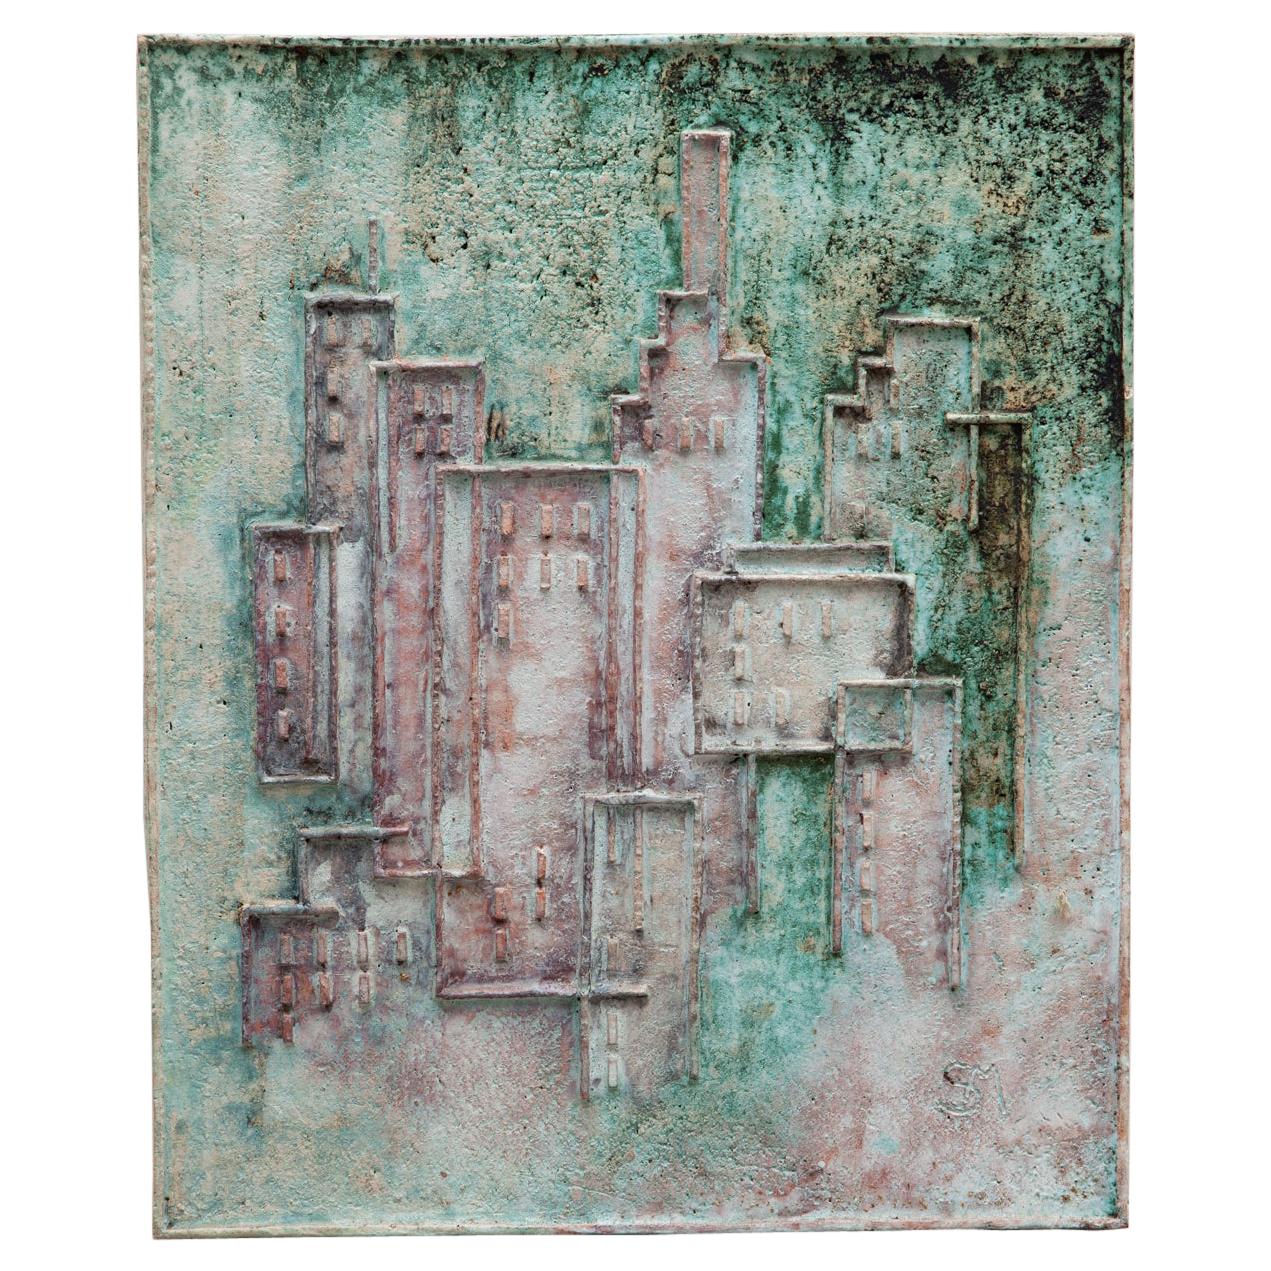 Abstract Cityscape Ceramic Relief in Green Tones, 1970s